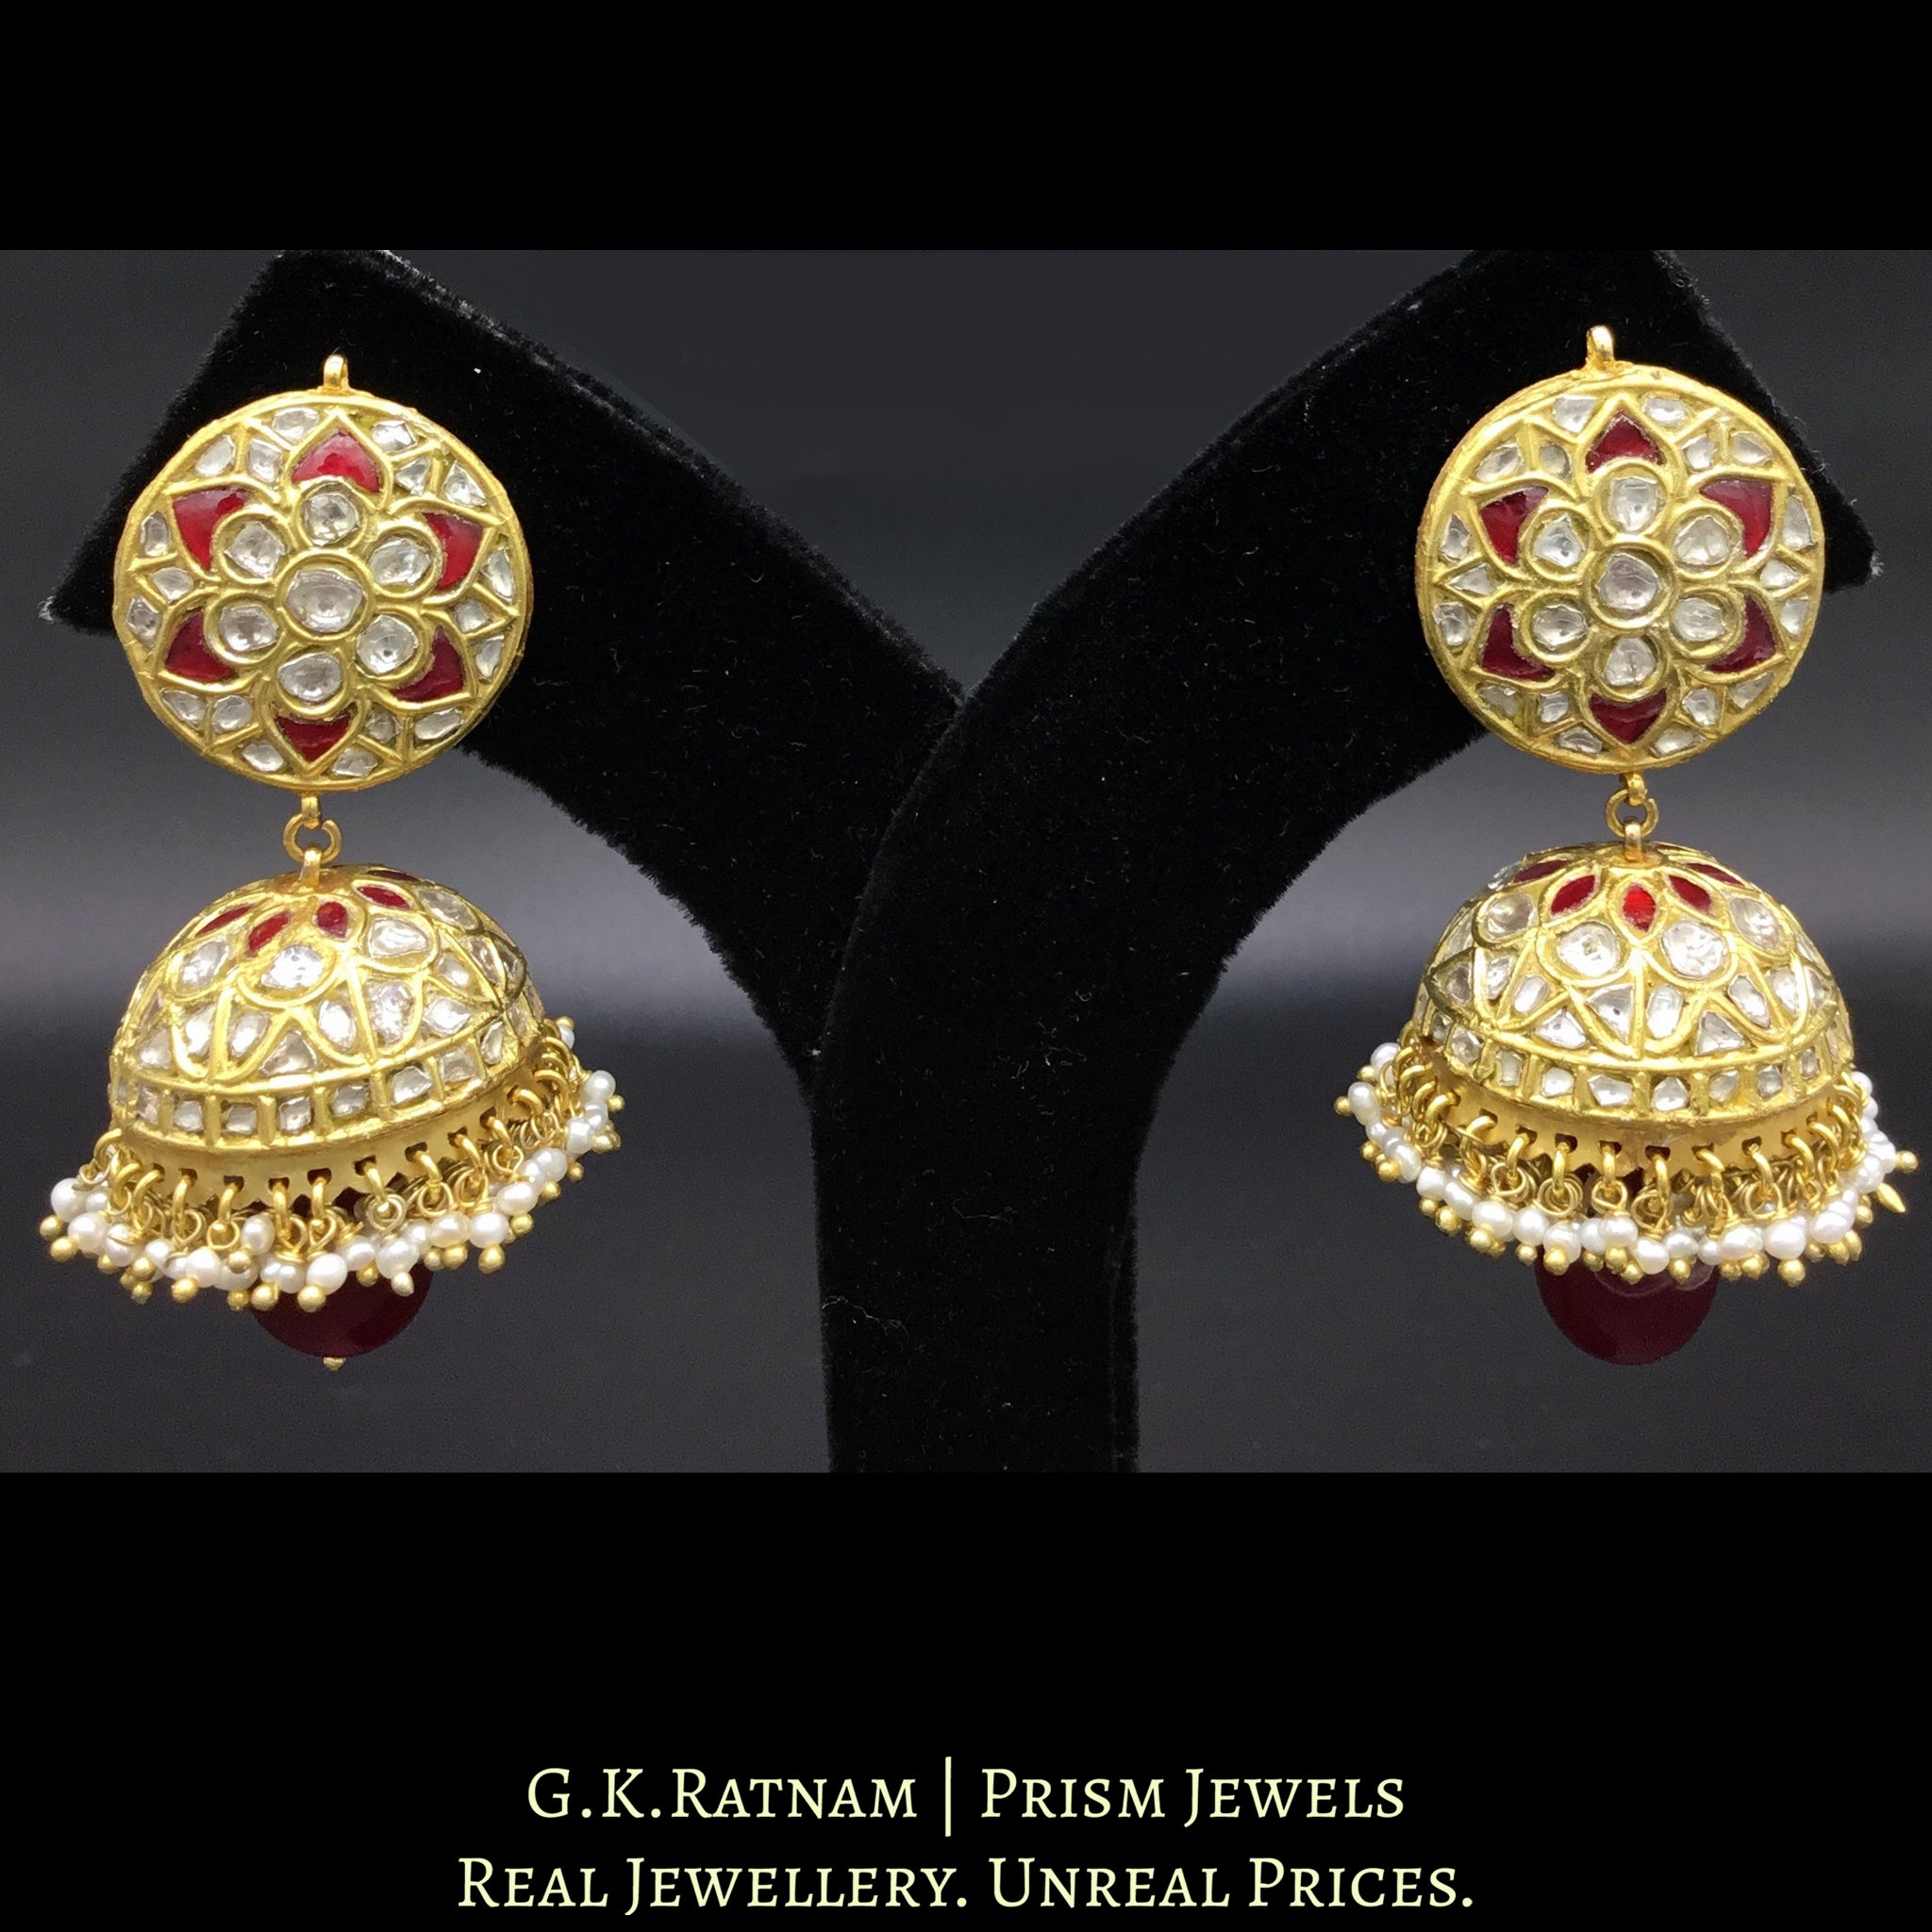 23k Gold and Diamond Polki red Jhumki Earring Pair with natural freshwater pearls